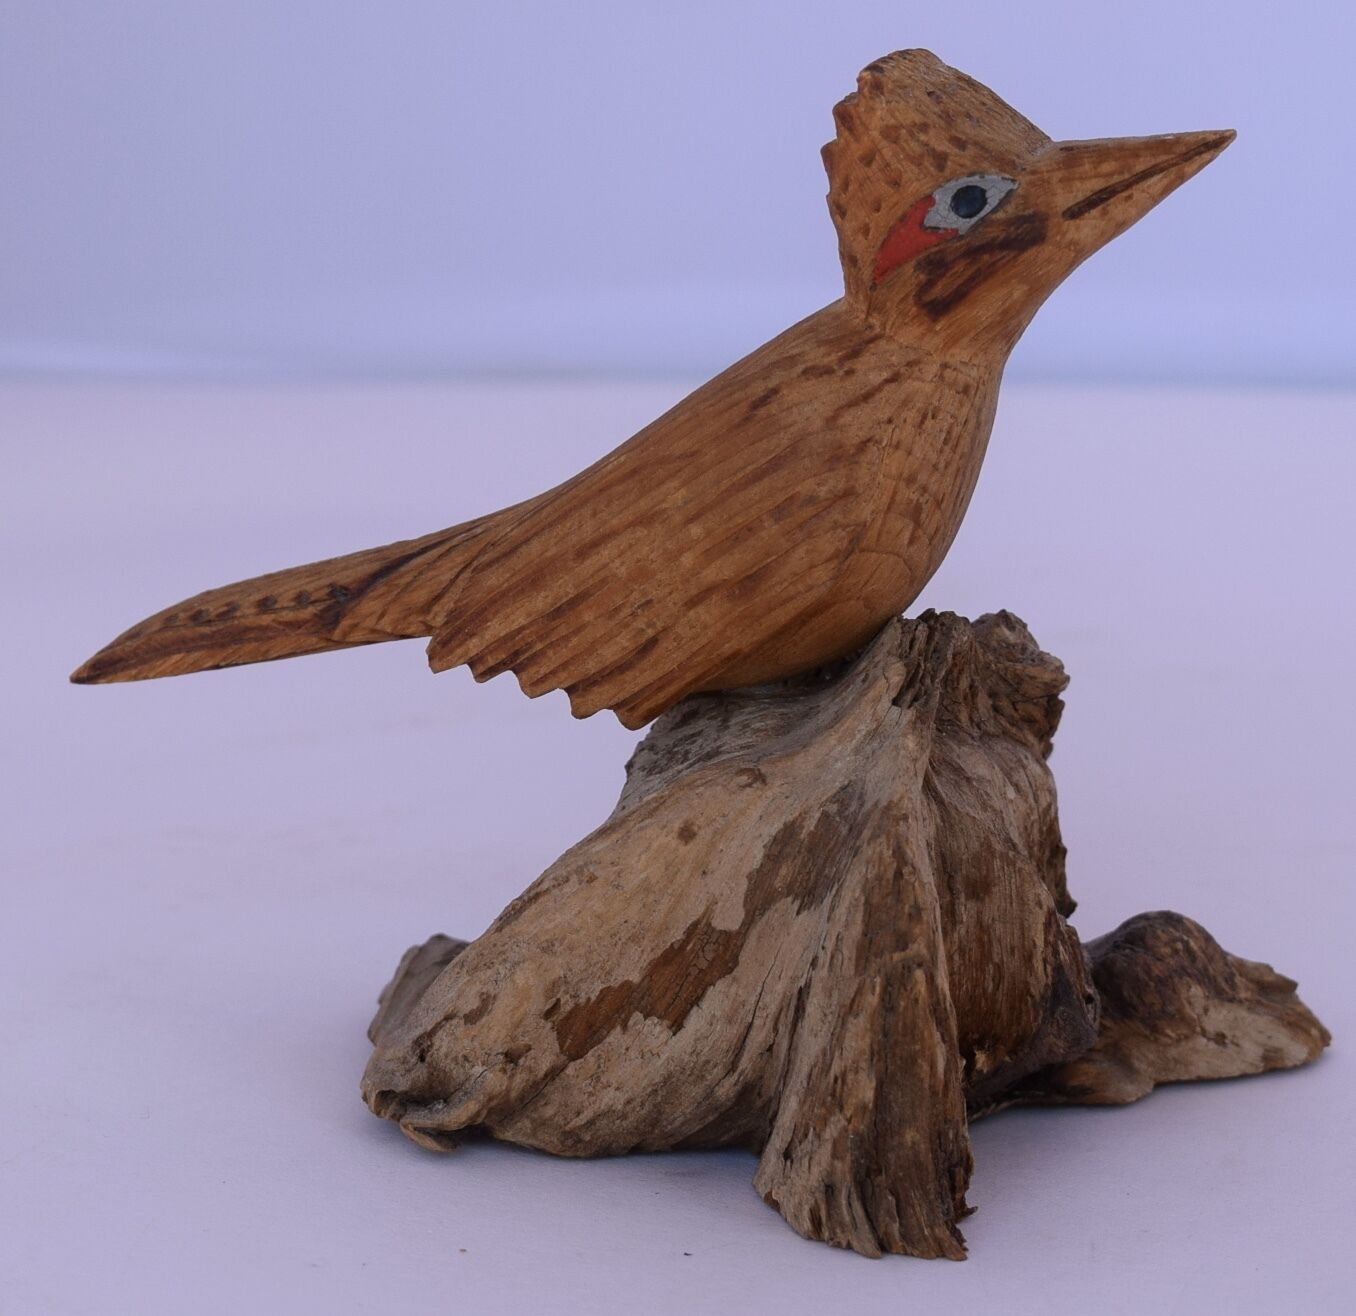 Vintage Bird painted wood carving sculpture Tesuque New Mexico by Fel Griego